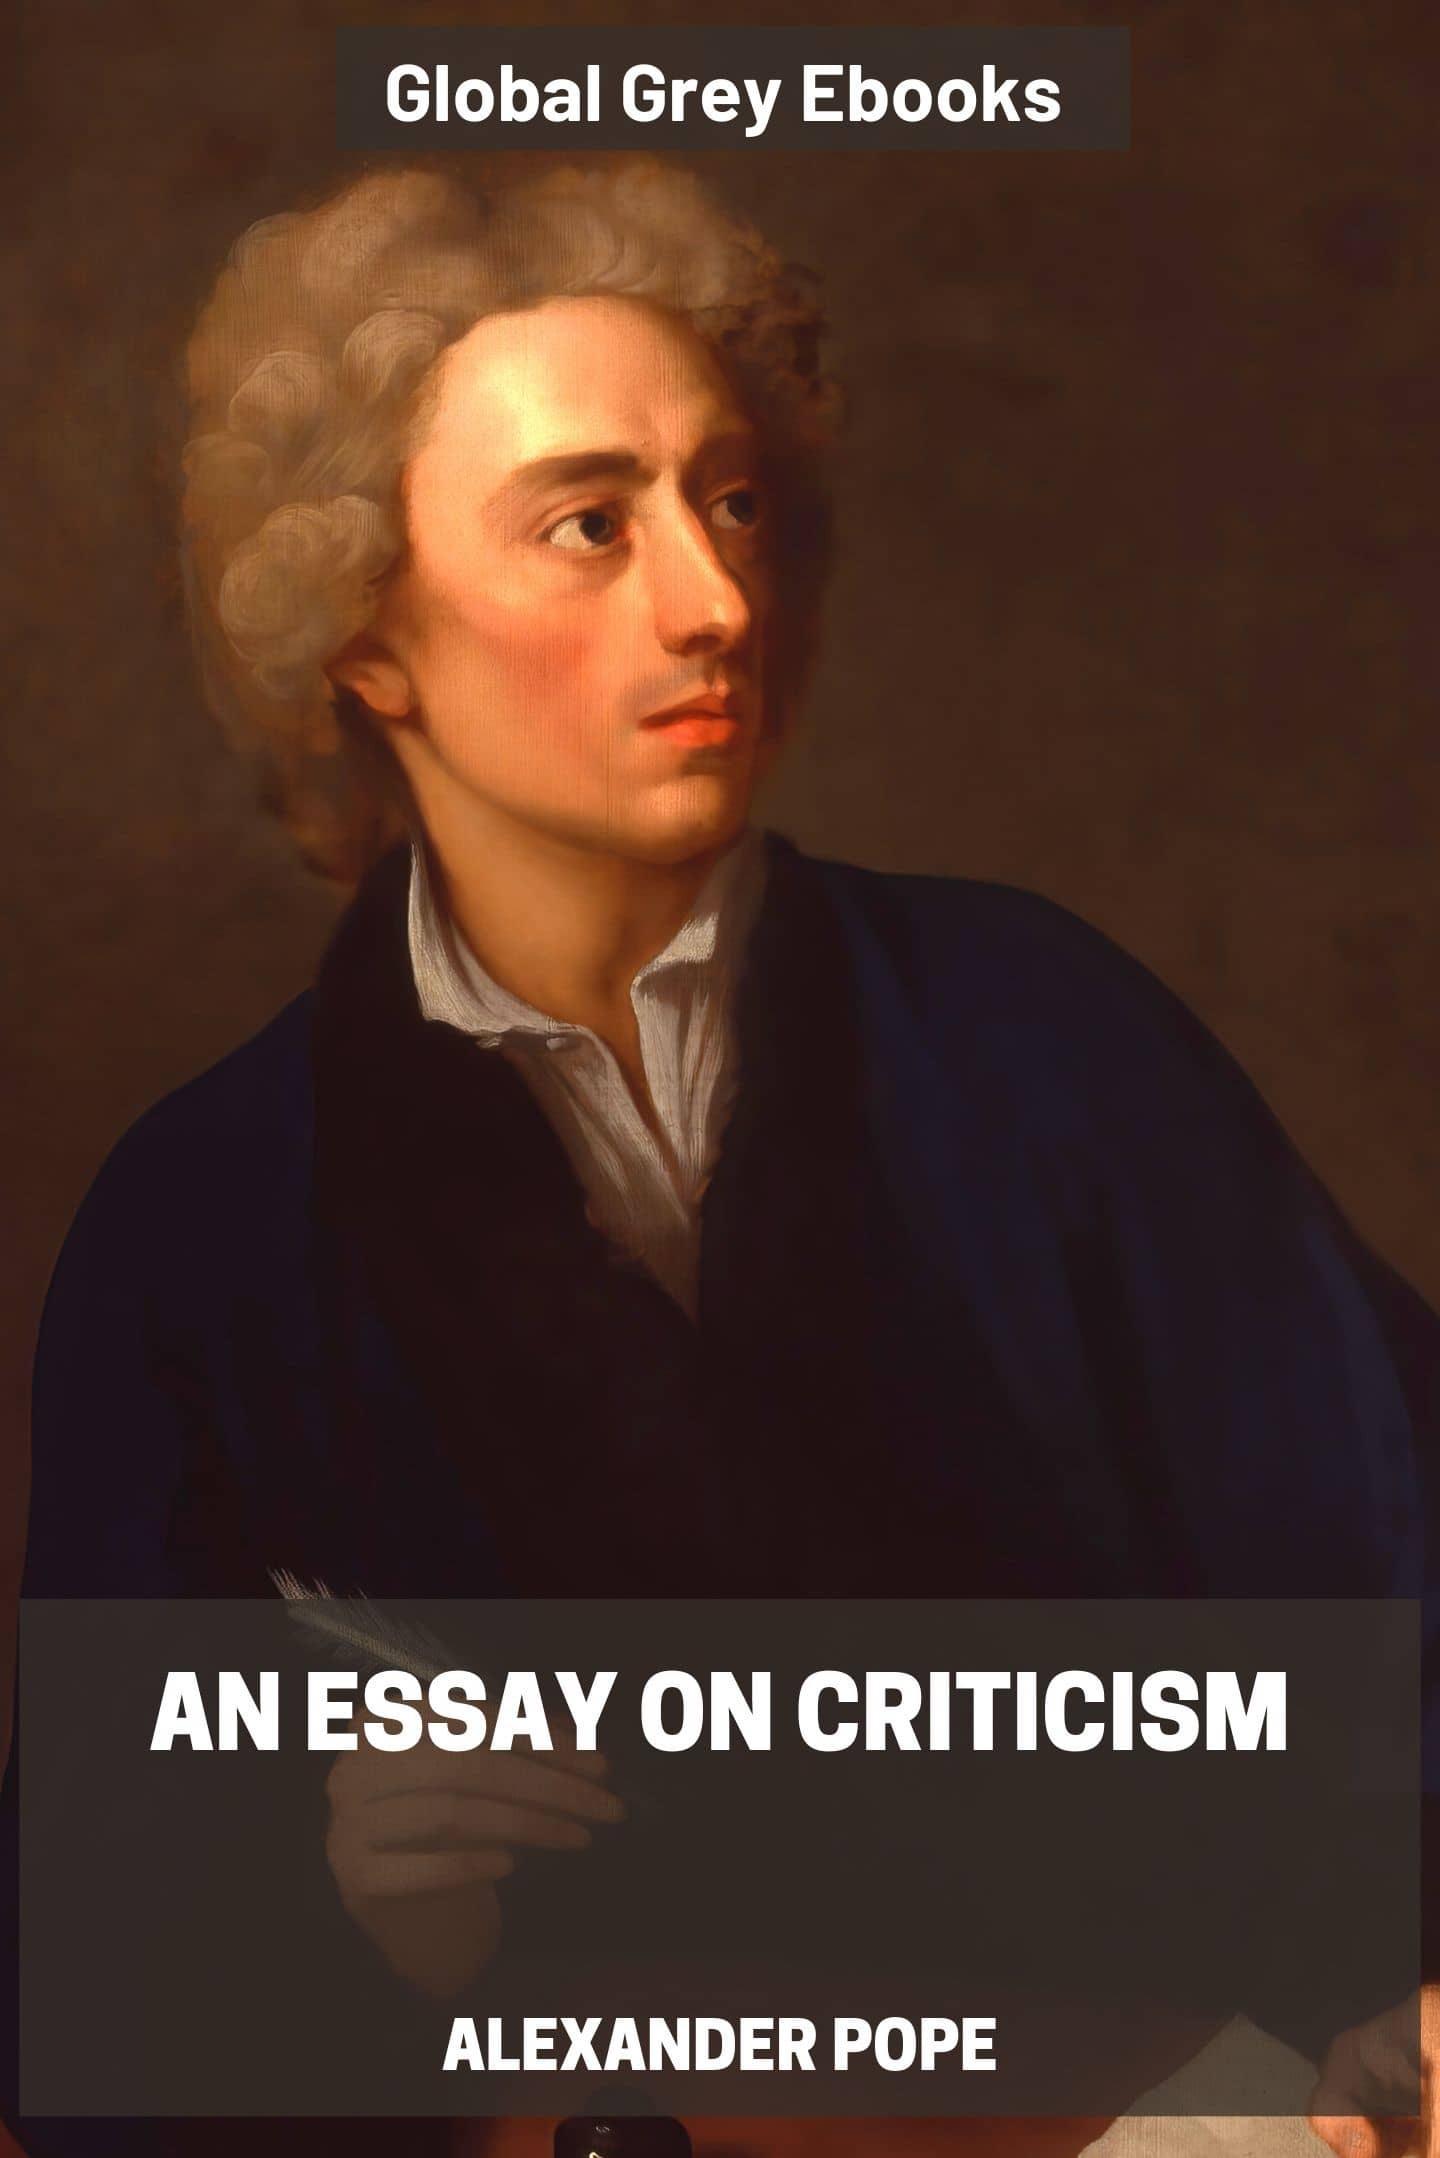 summary of alexander pope's an essay on criticism